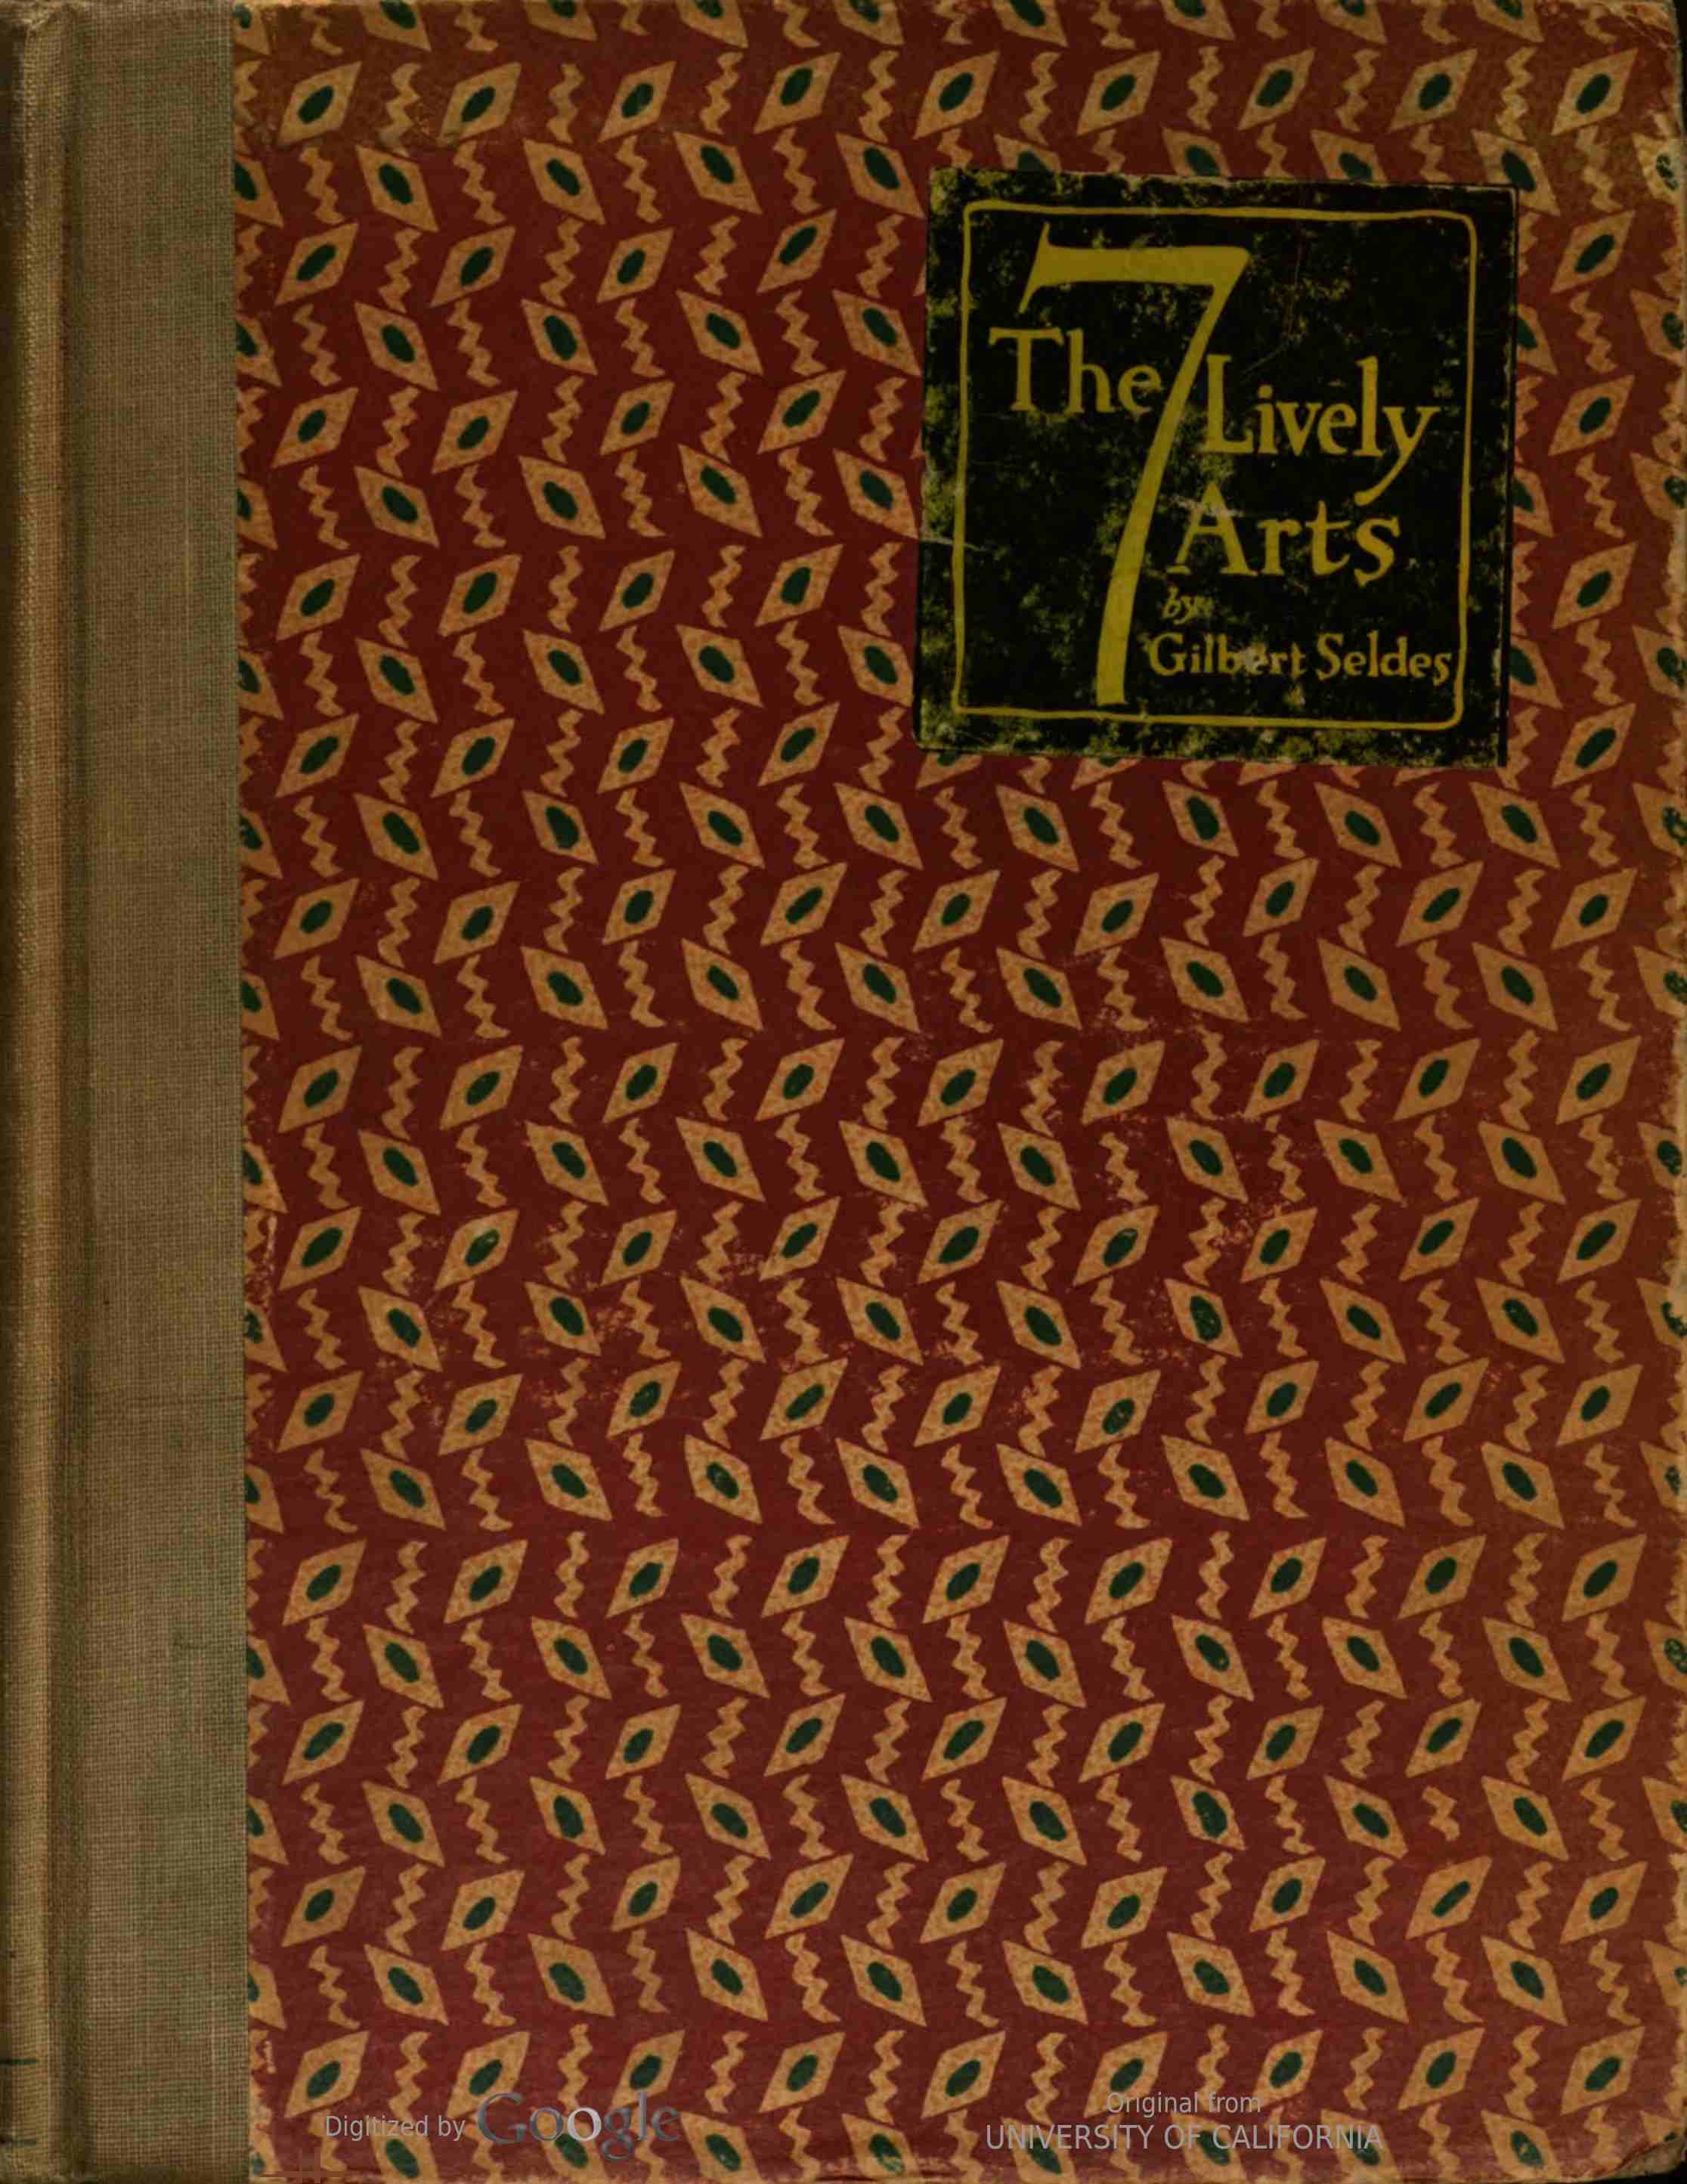 The 7 Lively Arts, by Gilbert Seldes—A Project Gutenberg eBook